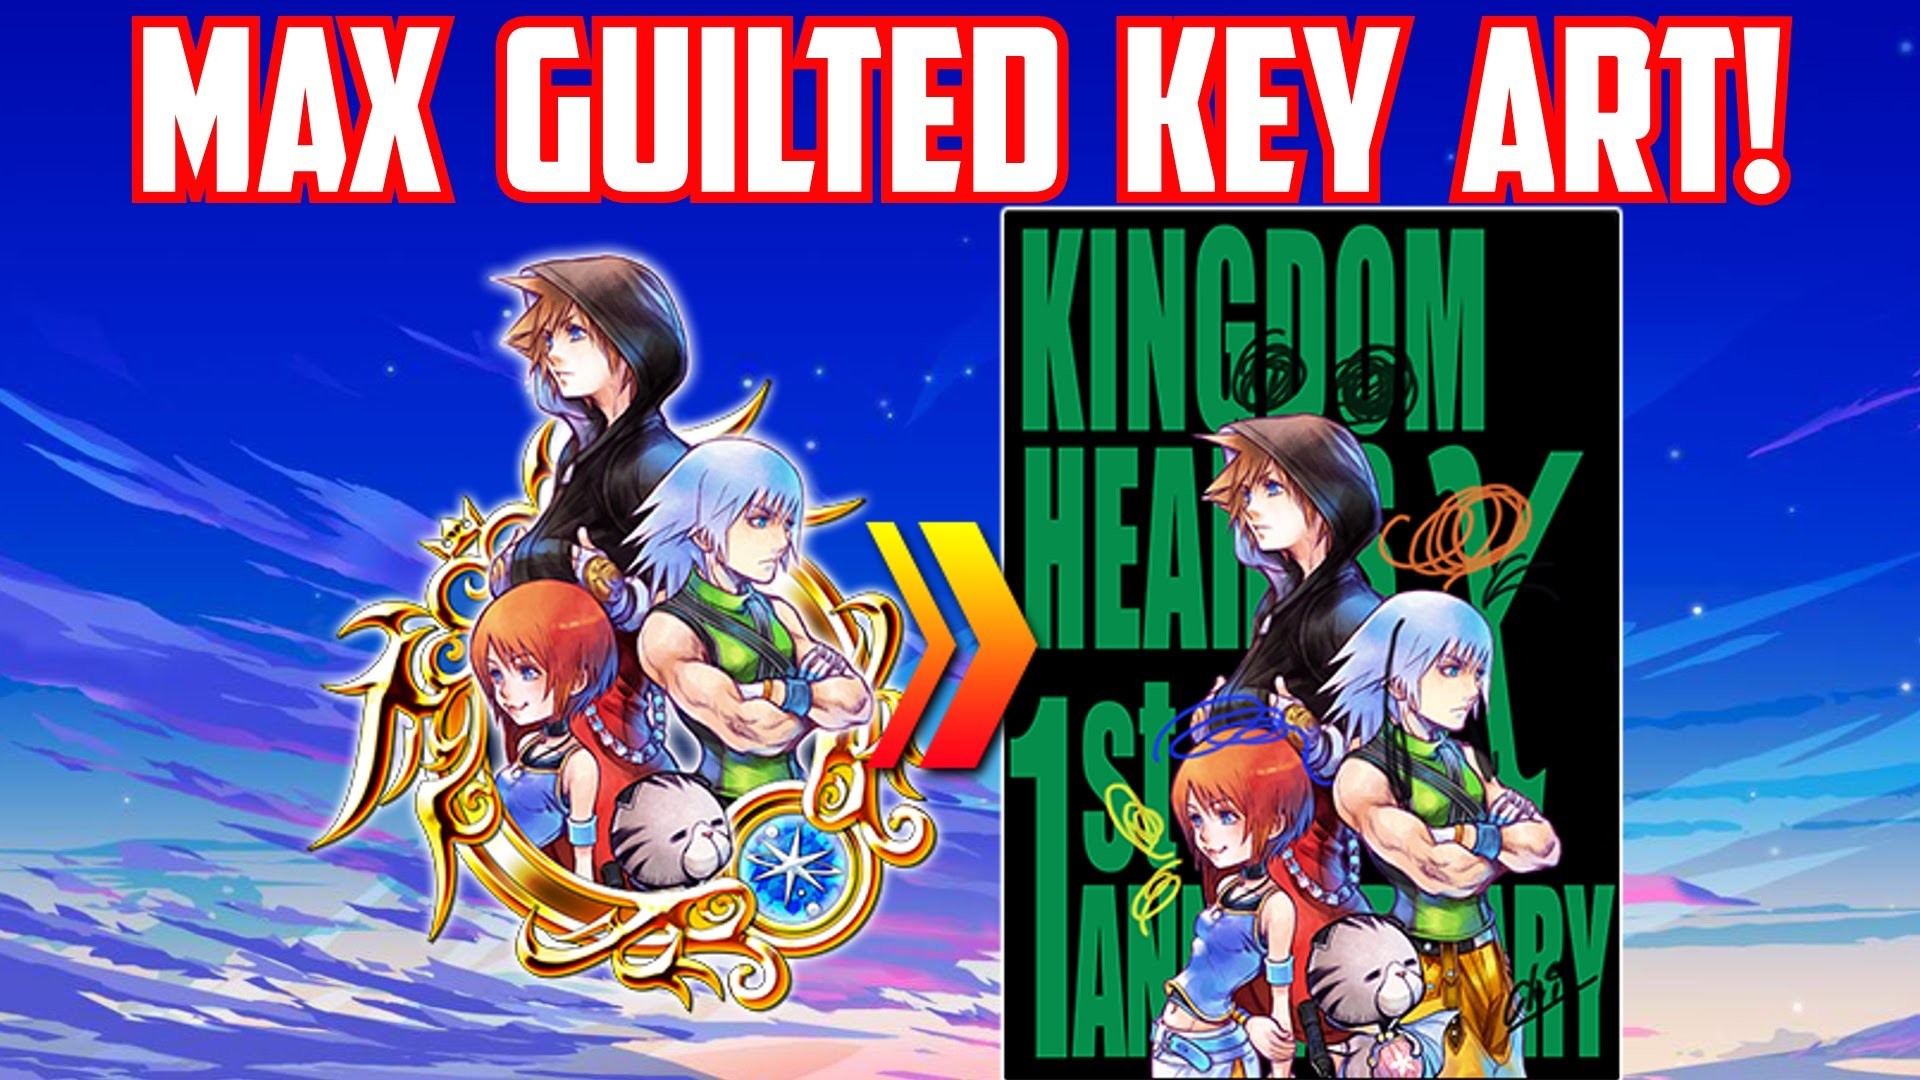 1920x1080 MAX GUILTED KEY ART! - 150% GUILT! - Kingdom Hearts Unchained X - YouTube